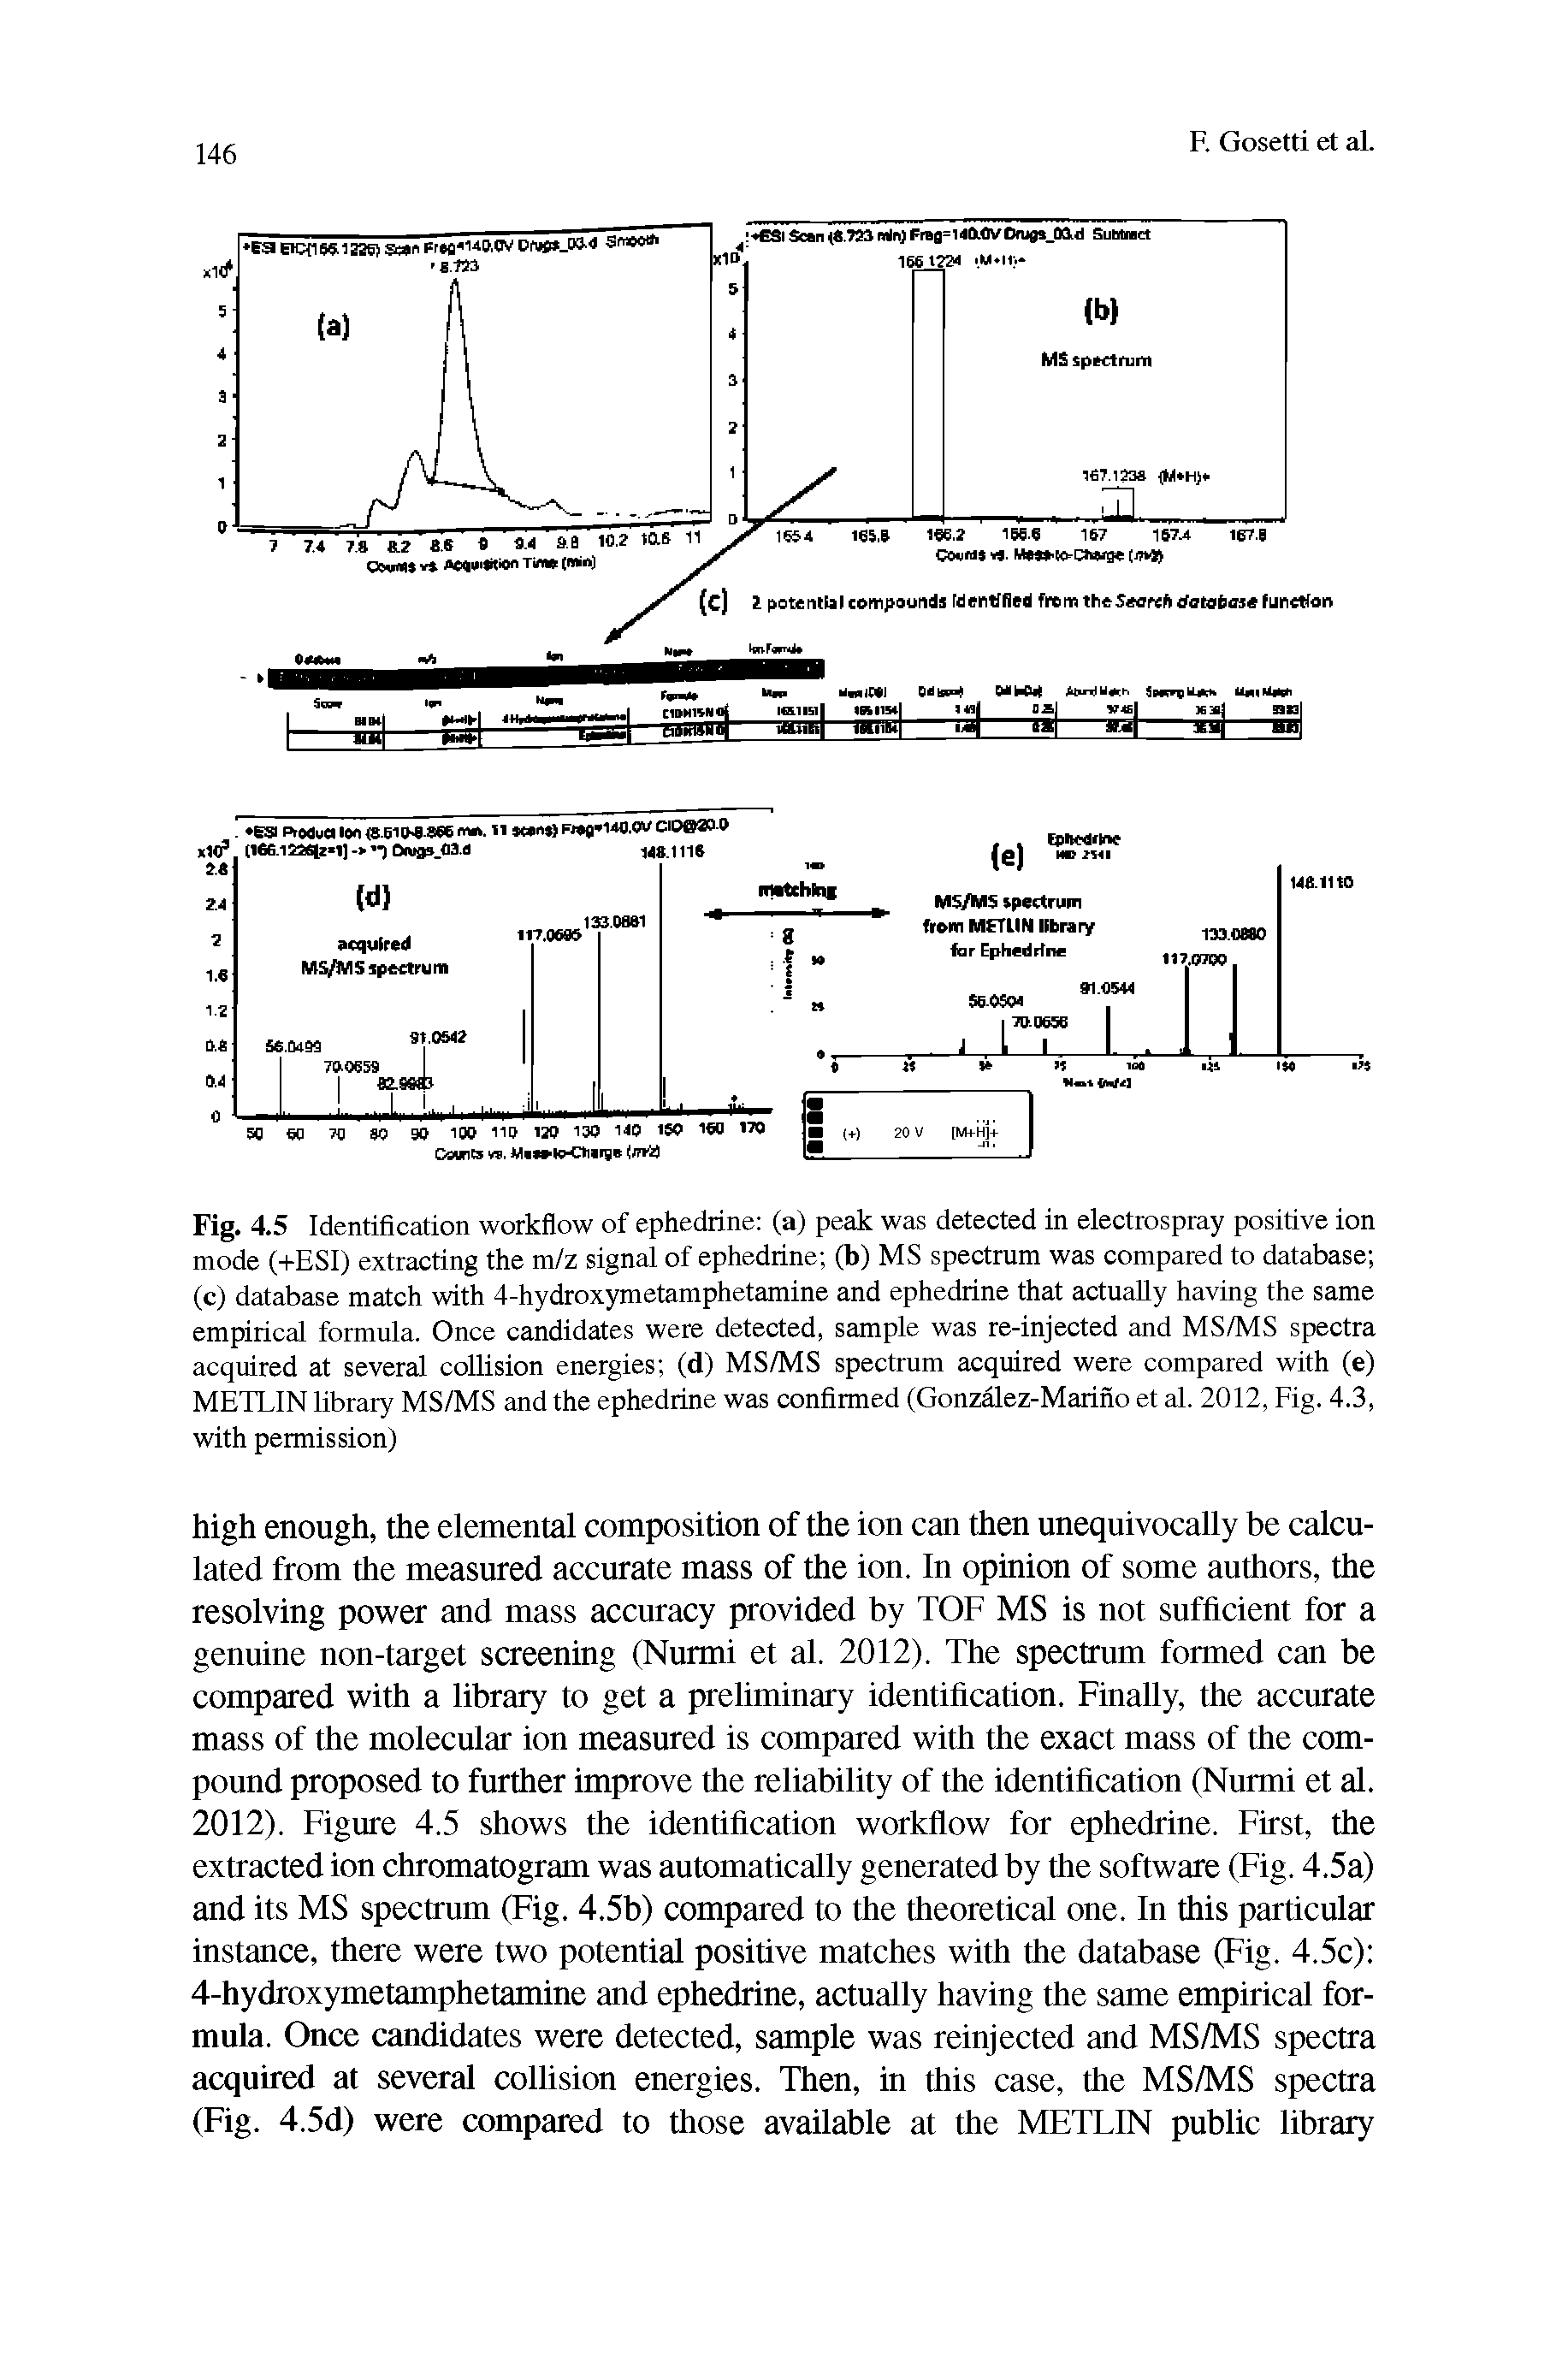 Fig. 4.5 Identification workflow of ephedrine (a) peak was detected in electrospray positive ion mode (+ESI) extracting the m/z signal of ephedrine (b) MS spectrum was compared to database (c) database match with 4-hydroxymetamphetamine and ephedrine that actually having the same emparical formula. Once candidates were detected, sample was re-injected and MS/MS spectra acquired at several collision energies (d) MS/MS spectrum acquired were compared with (e) METLIN library MS/MS and the ephedrine was confirmed (Gonzdlez-Marino et al. 2012, Fig. 4.3, with permission)...